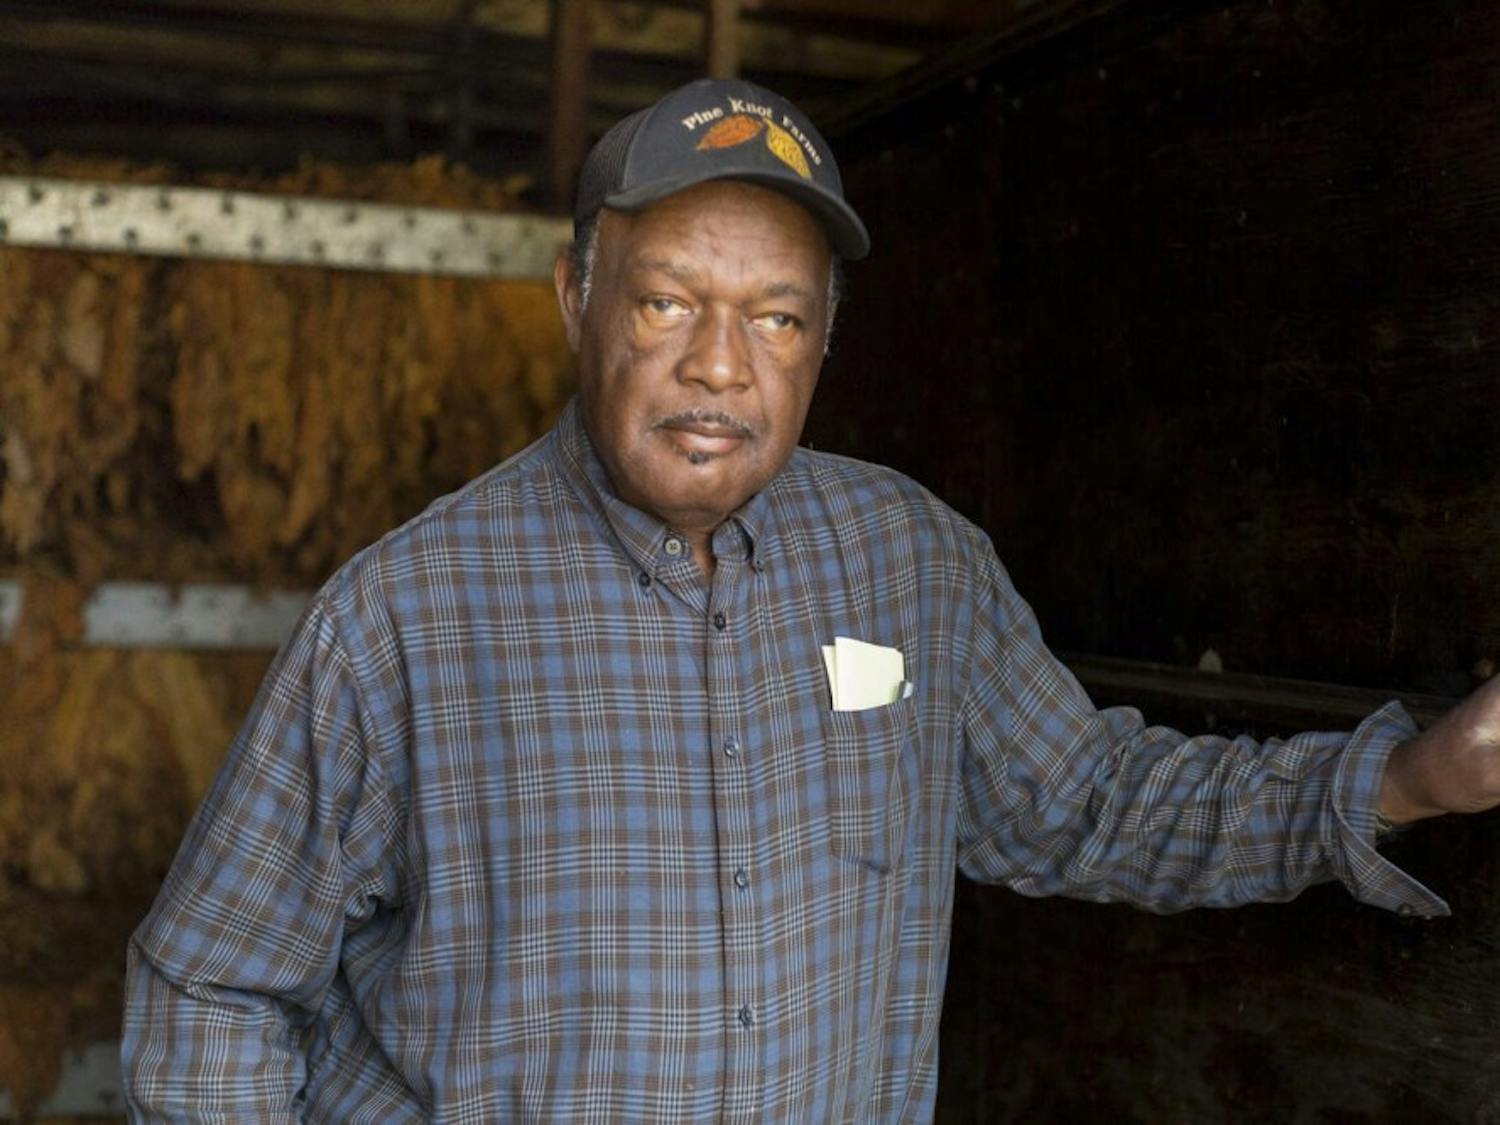 Stanley Hughes poses for a portrait in front of tobacco drying racks at Pine Knot Farms on Monday.